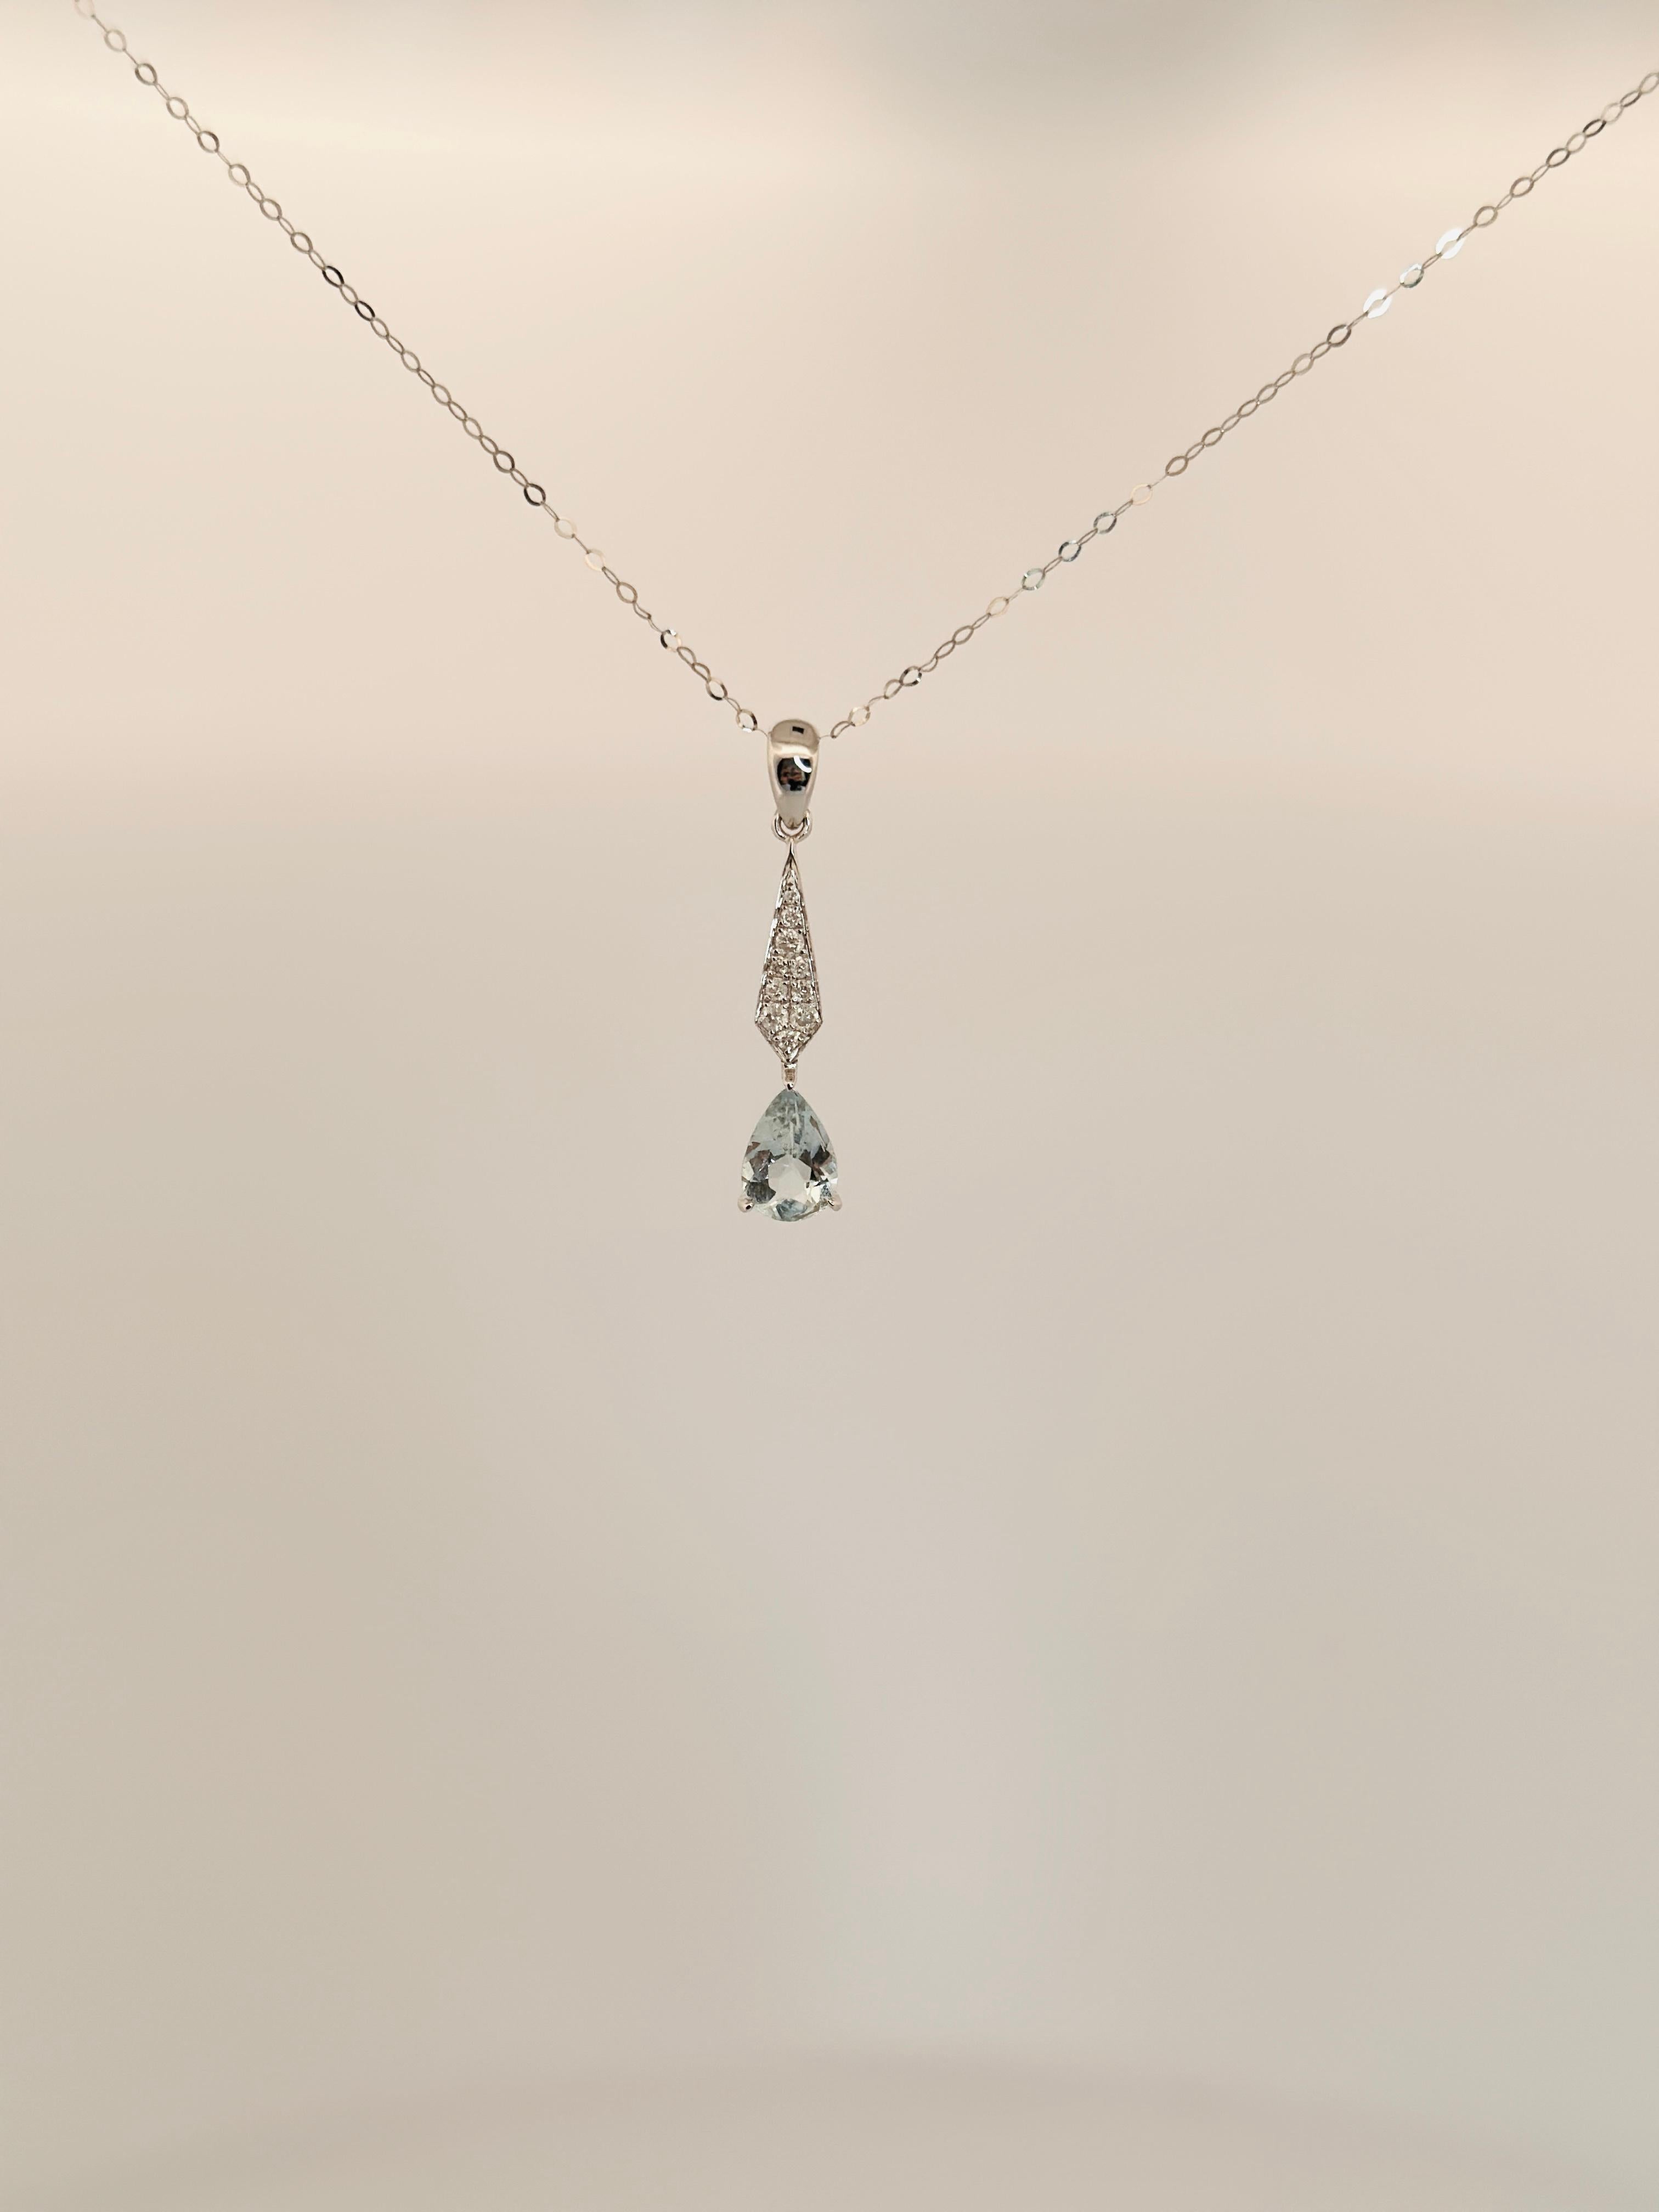 An 18k gold diamond and aquamarine teardrop pendant necklace is a piece of jewelry that is made of 18 karat gold and features a teardrop-shaped aquamarine stone with diamonds. The aquamarine stone is usually a pale blue color and the diamonds are